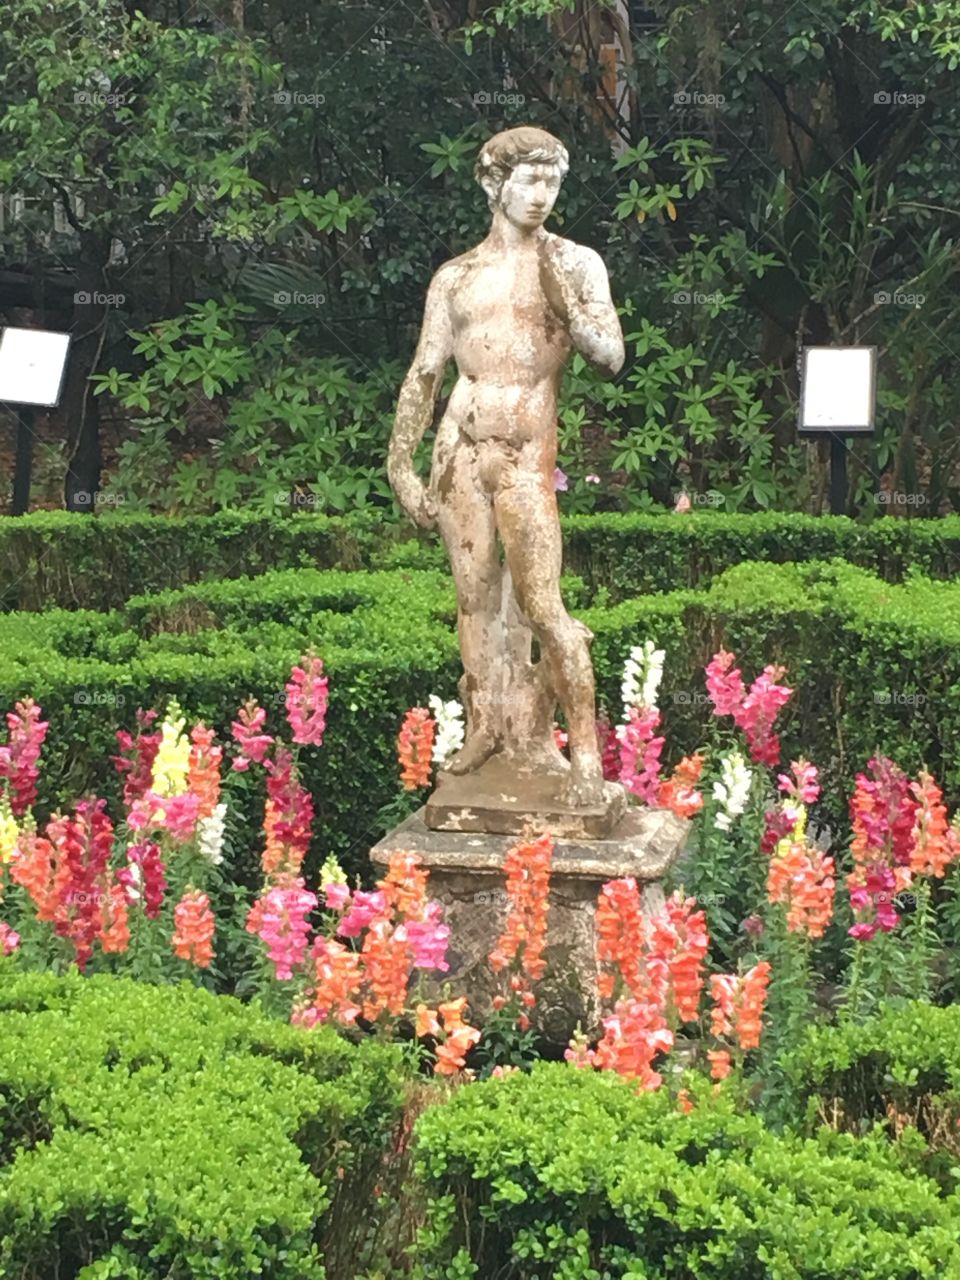 A sculpture of a man keeps guard over the flowers